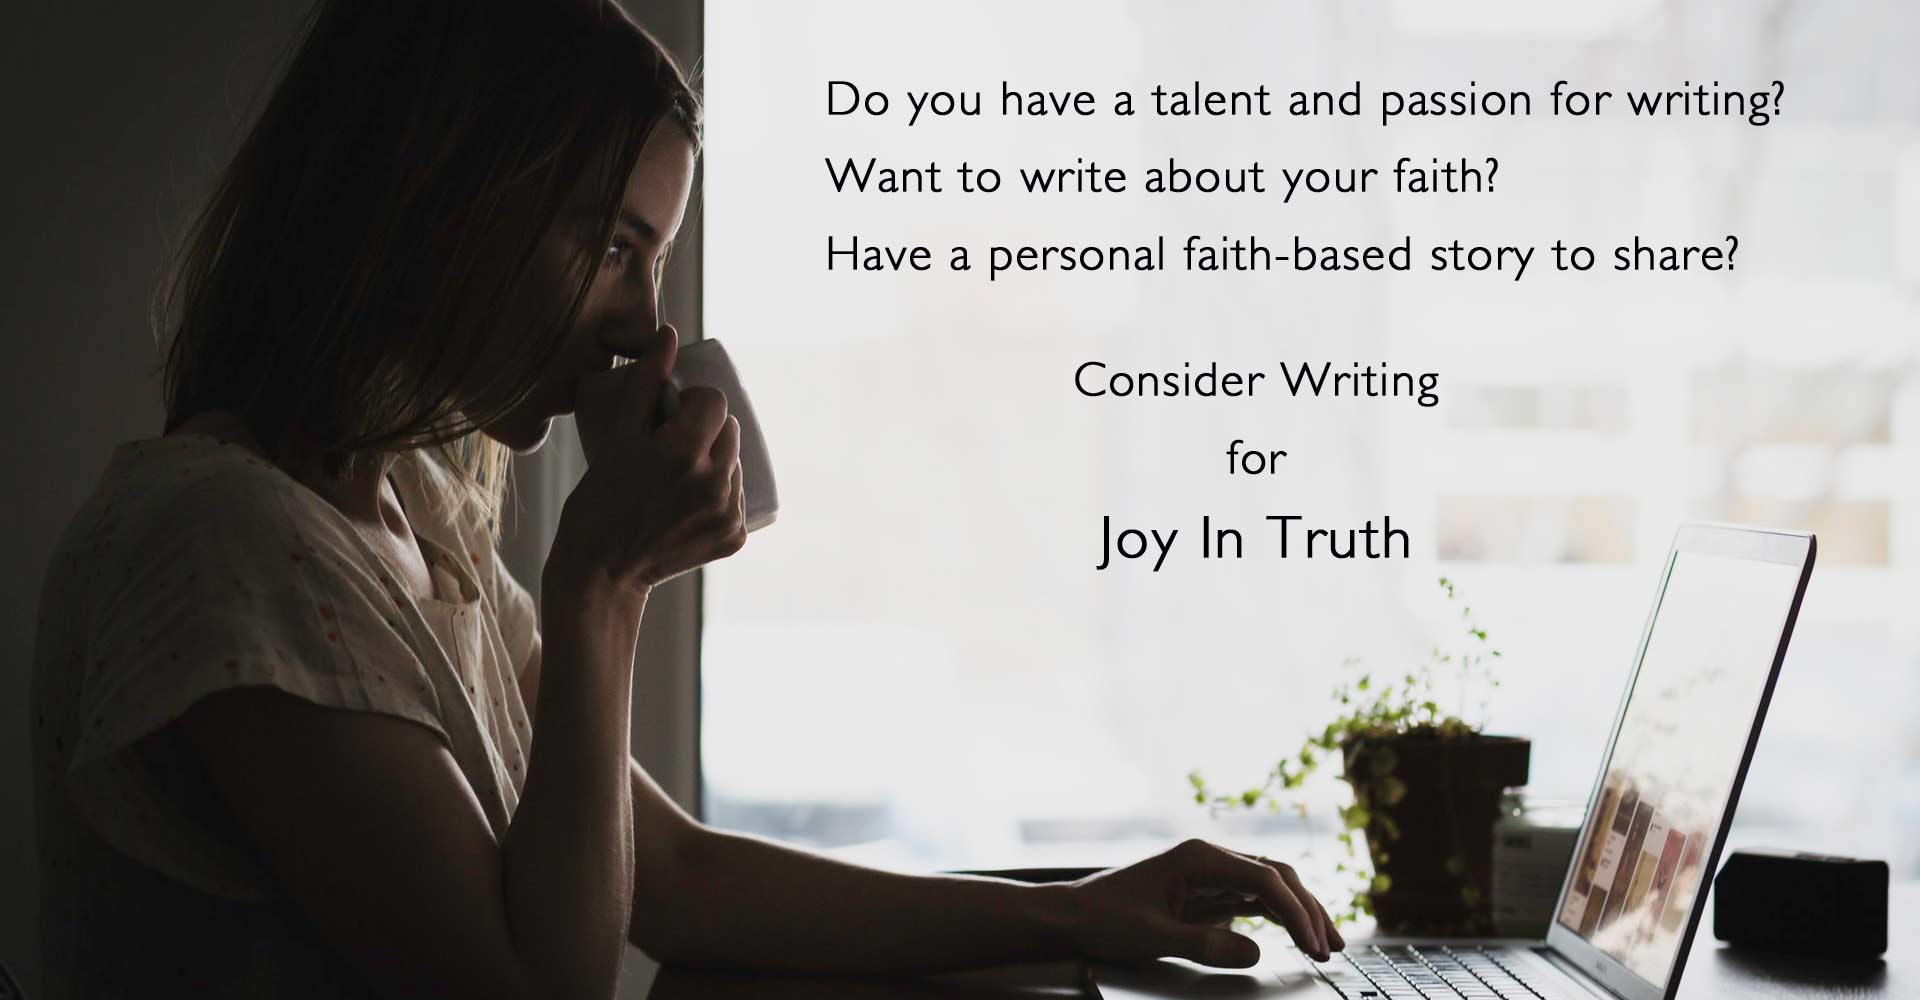 Joy In Truth is looking for writers